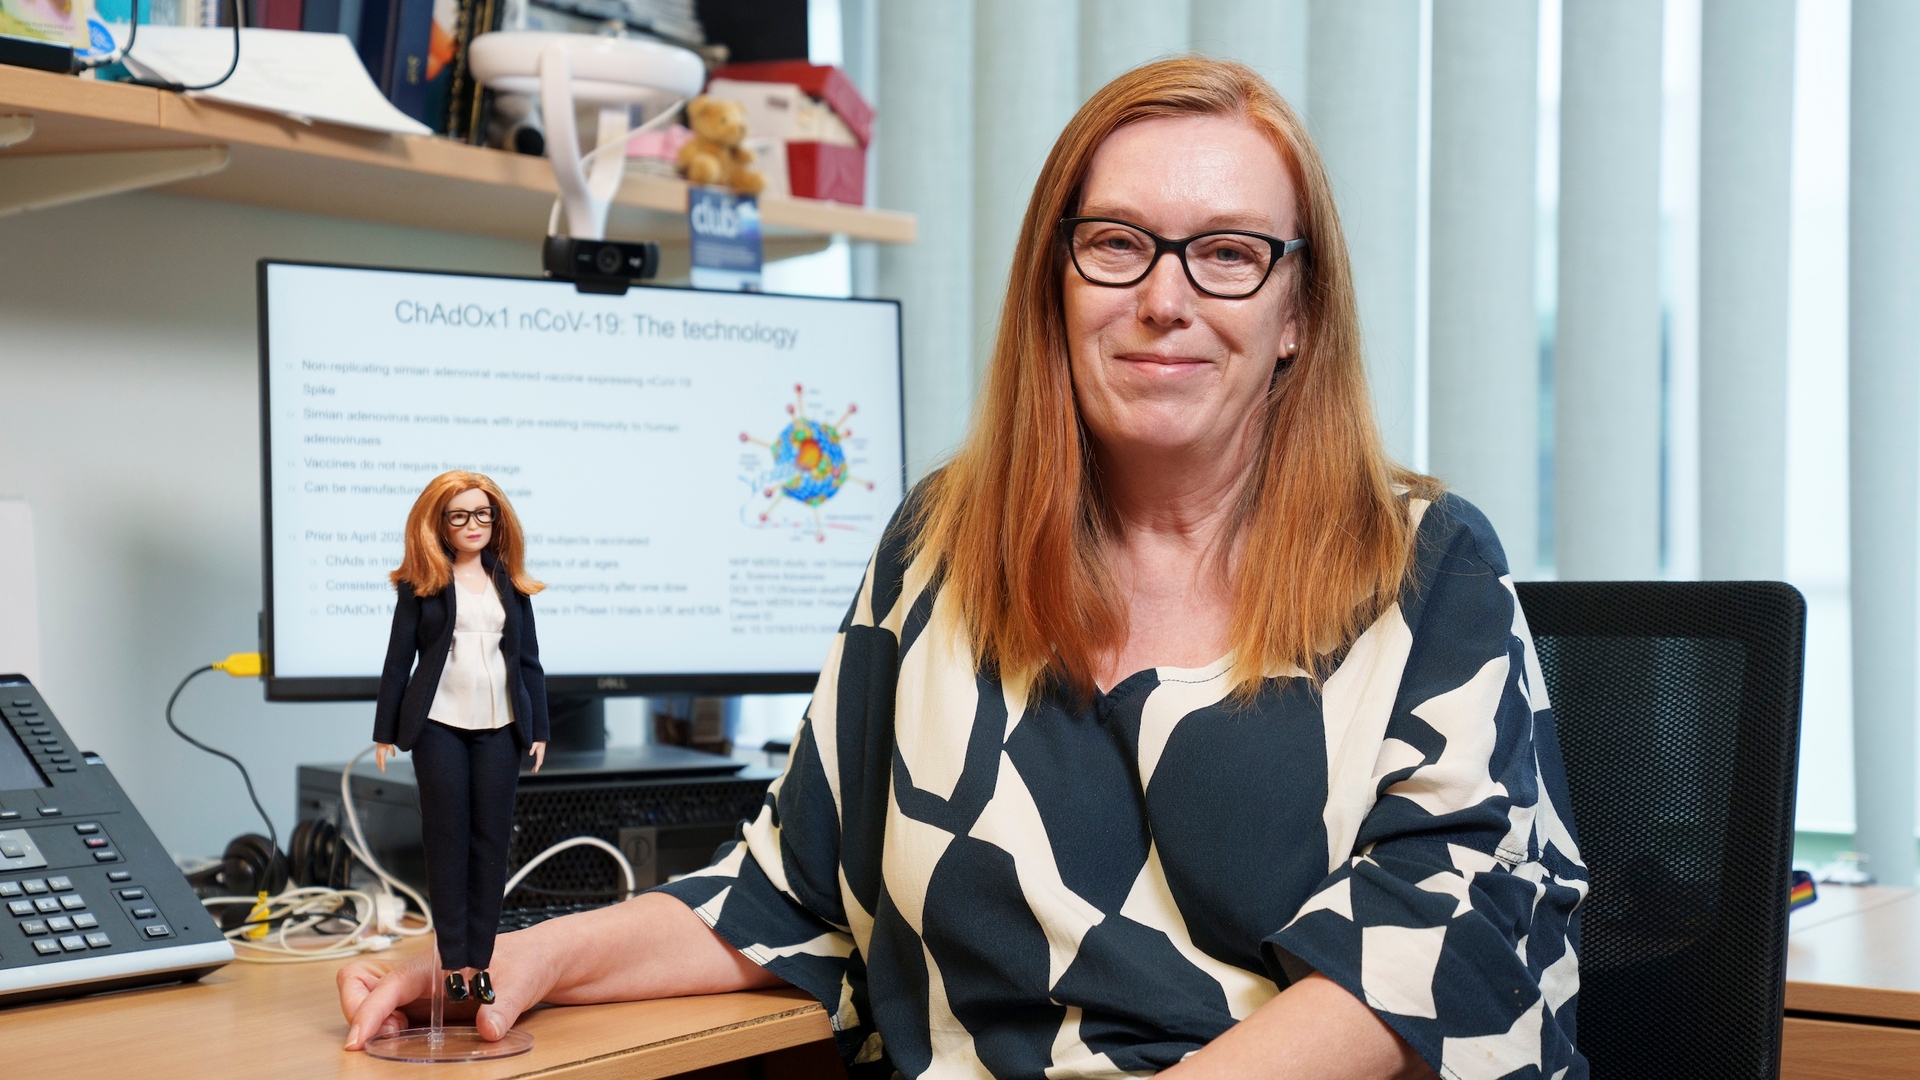 Oxford vaccine project leader Sarah Gilbert gets a Barbie